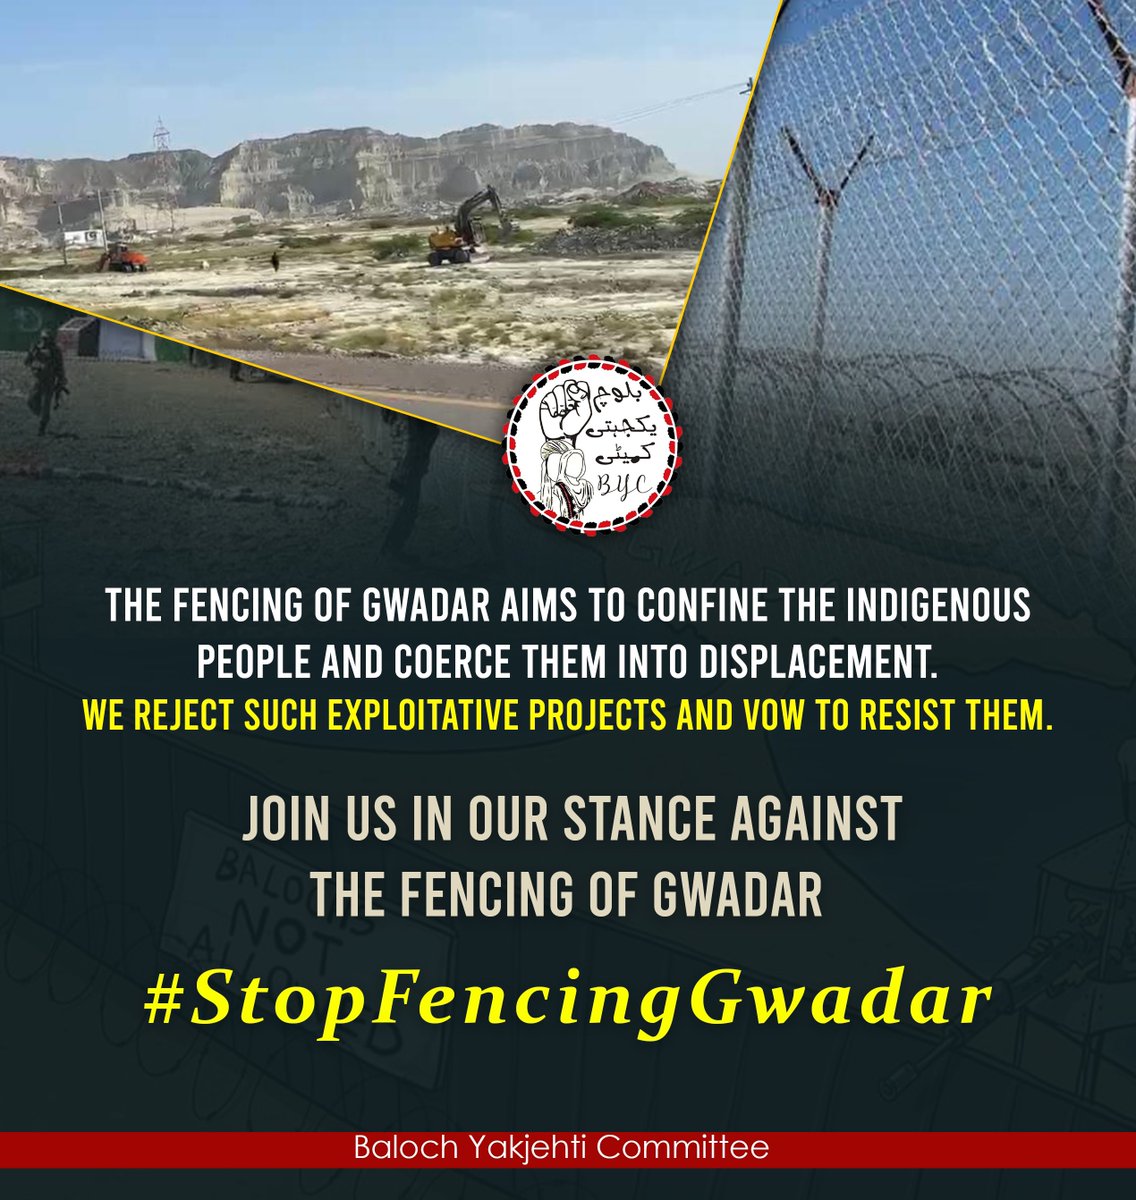 The fencing of Gwadar aims to confine the indigenous people and coerce them into displacement. 
We reject such exploitative projects and vow to resist them. 

Join us in our stance against the fencing of Gwadar. 

#StopFencingGwadar